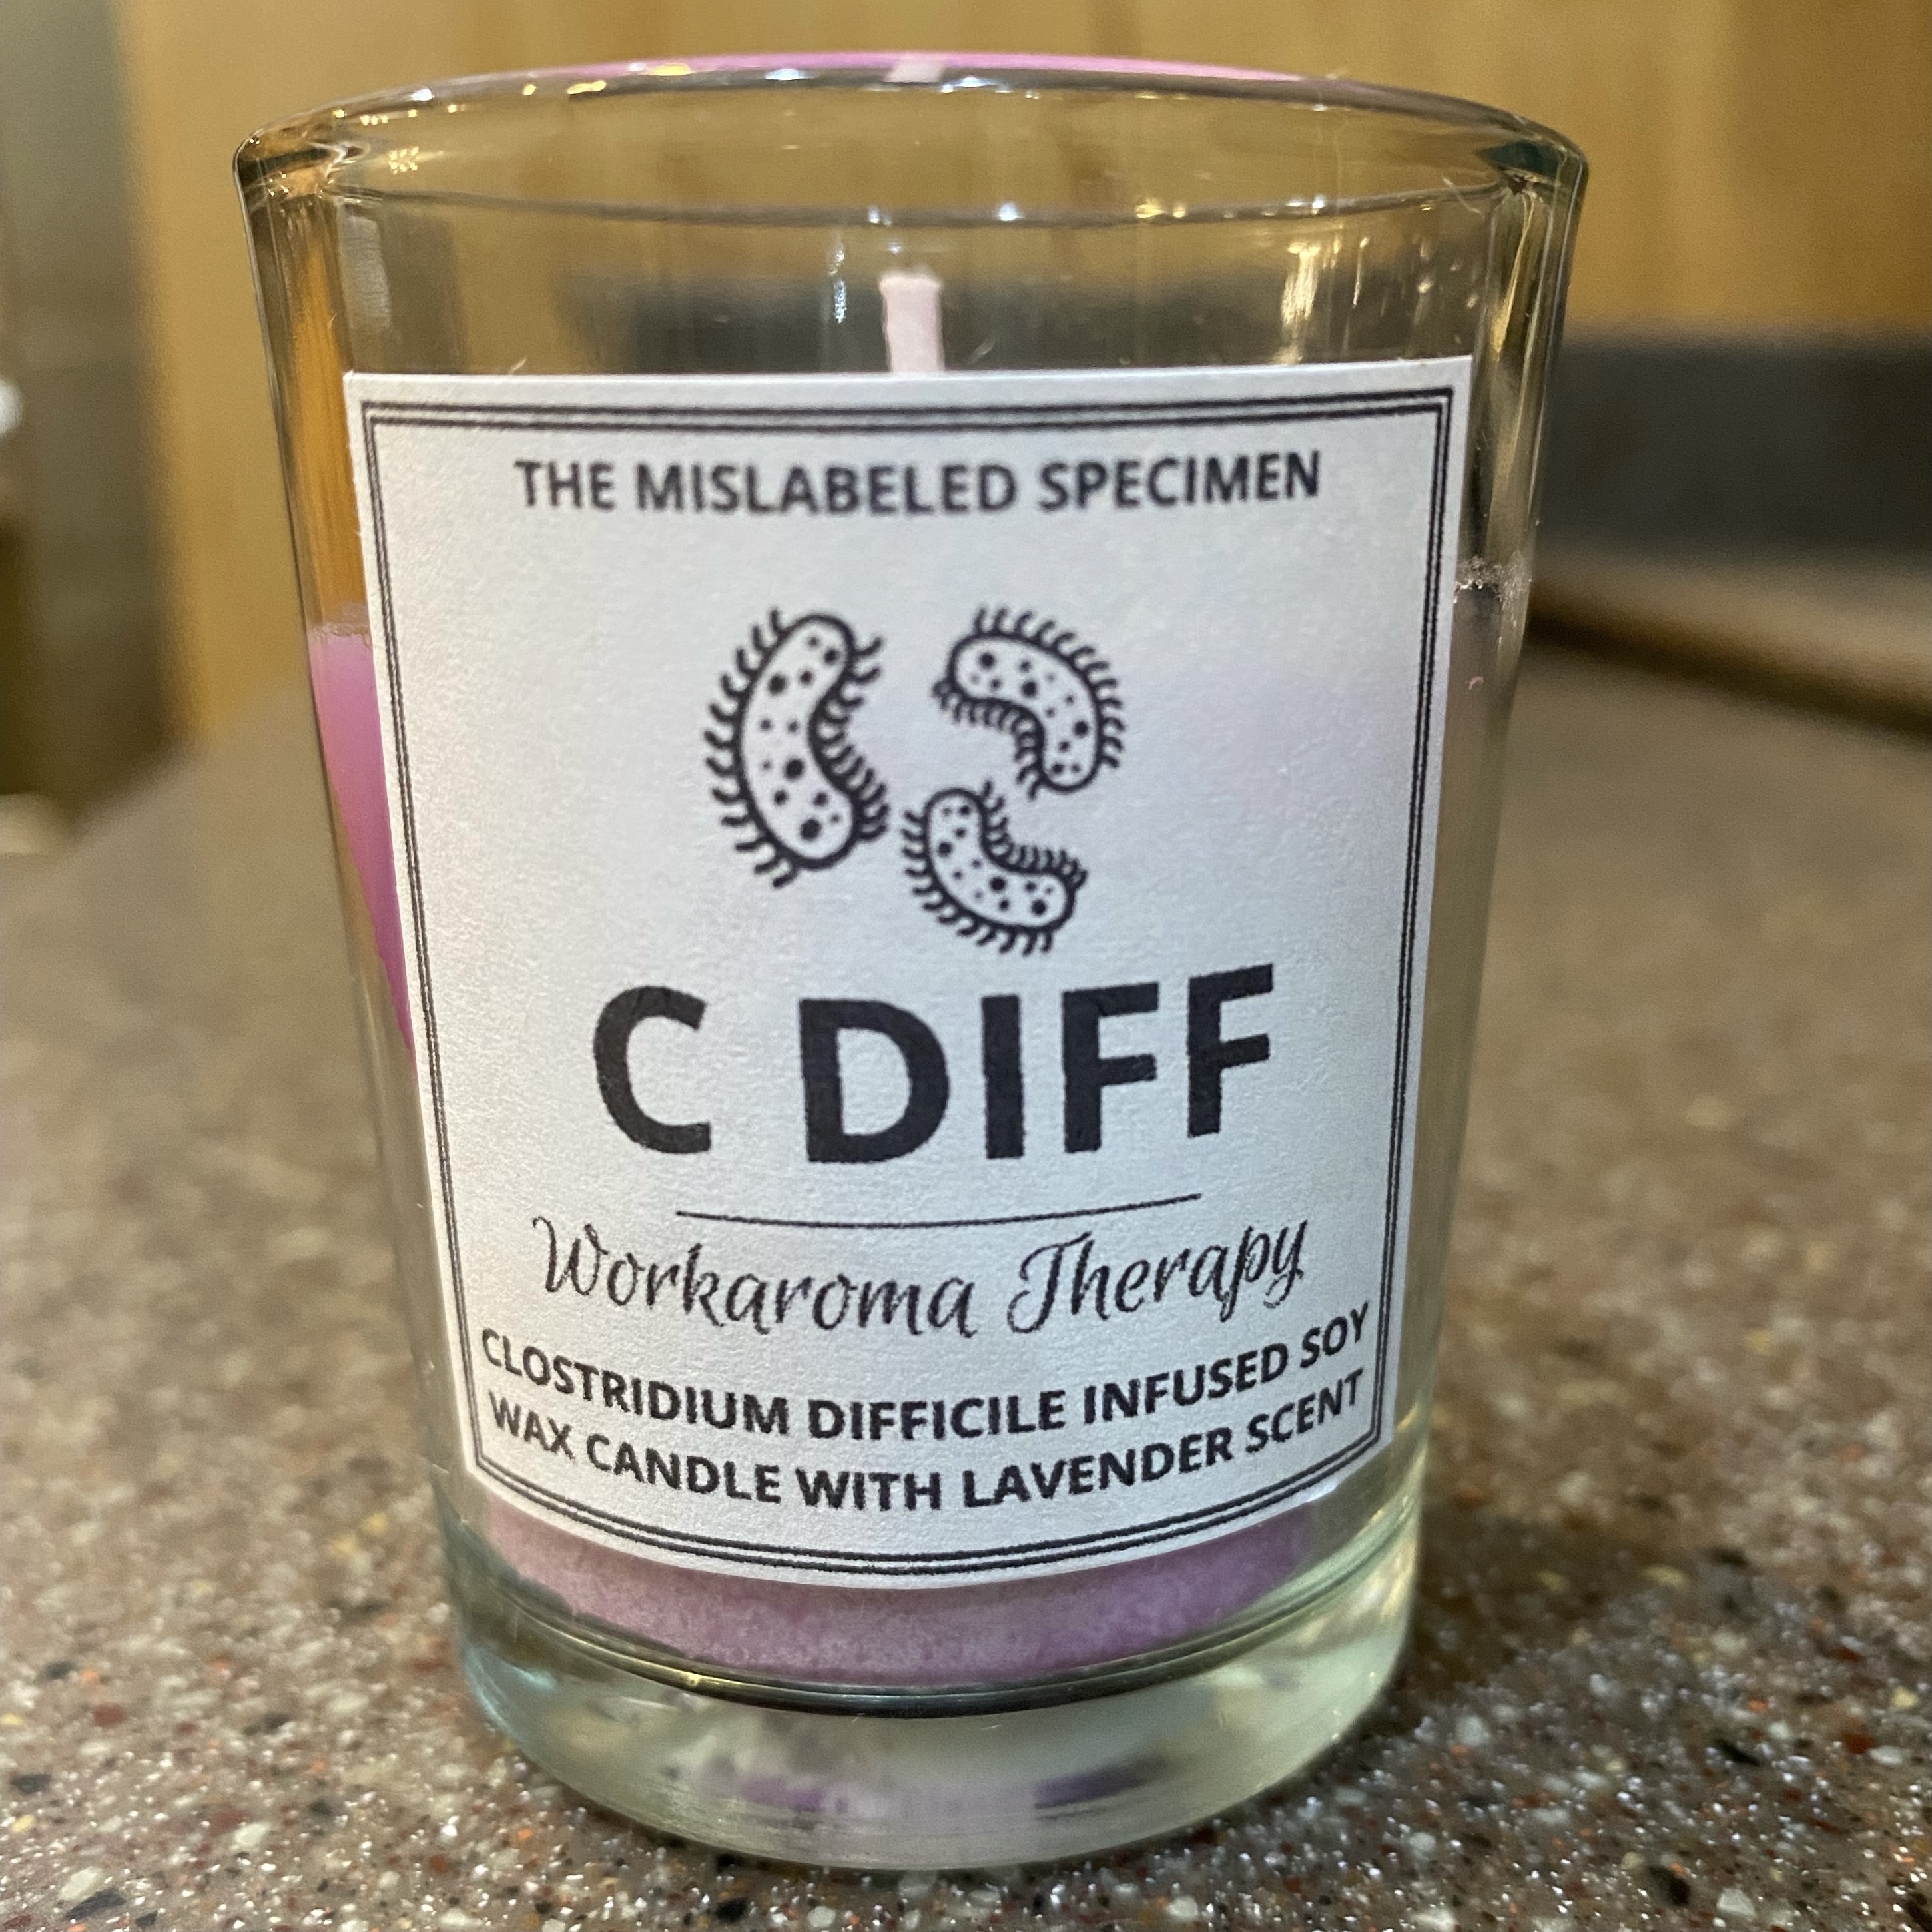 C Diff Workaroma Therapy Funny Gag Candles Scented Natural Soy Wax Candle  with Rose Scent - The Mislabeled Specimen